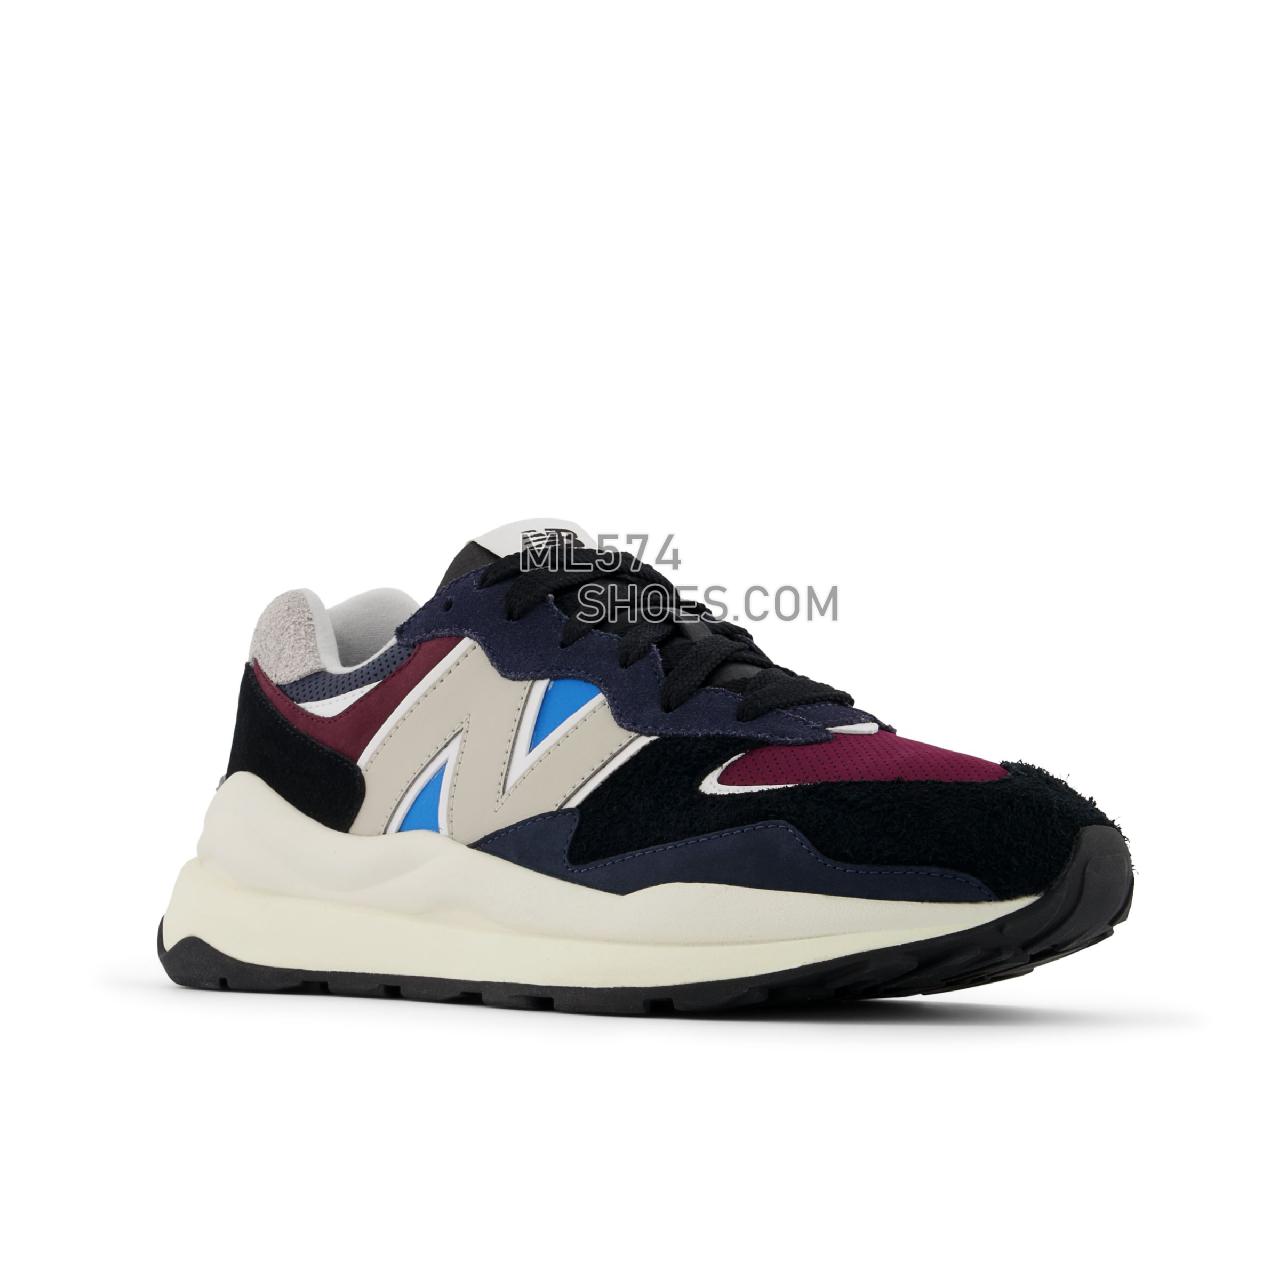 New Balance 57/40 - Men's Classic Sneakers - Nb Navy with Nb Burgundy - M5740TB